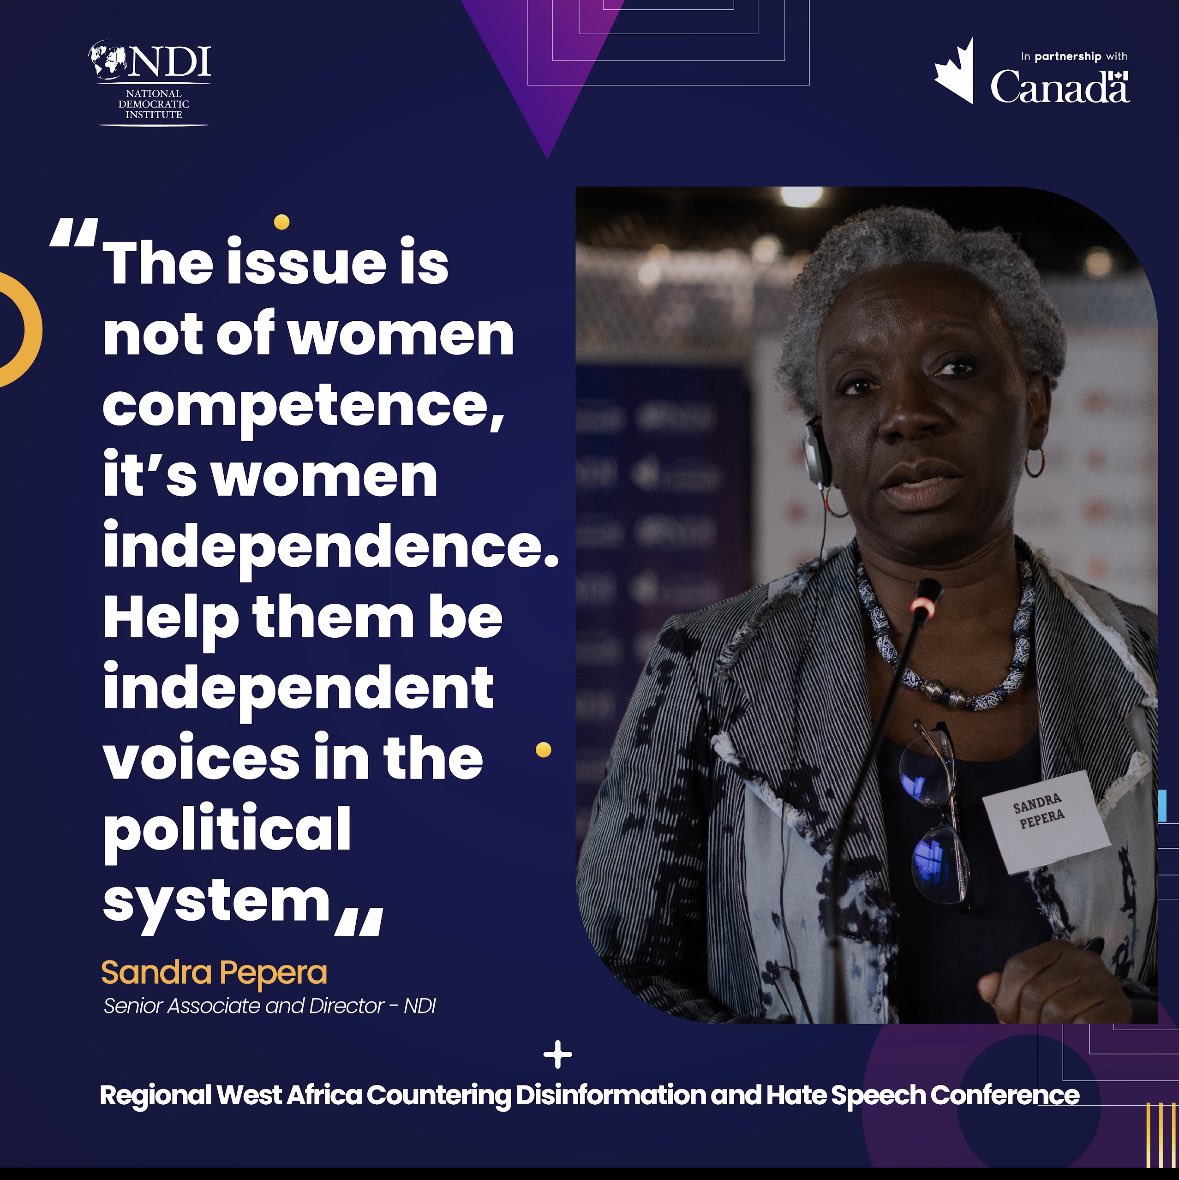 Addressing gender norms and stereotypes is vital for #women's political empowerment. Promoting inclusivity in political parties and enhancing women's political participation leads to a stronger democracy #GenderEquality #InclusivePolitics #WomenInPower #ChangingtheFaceofPolitics